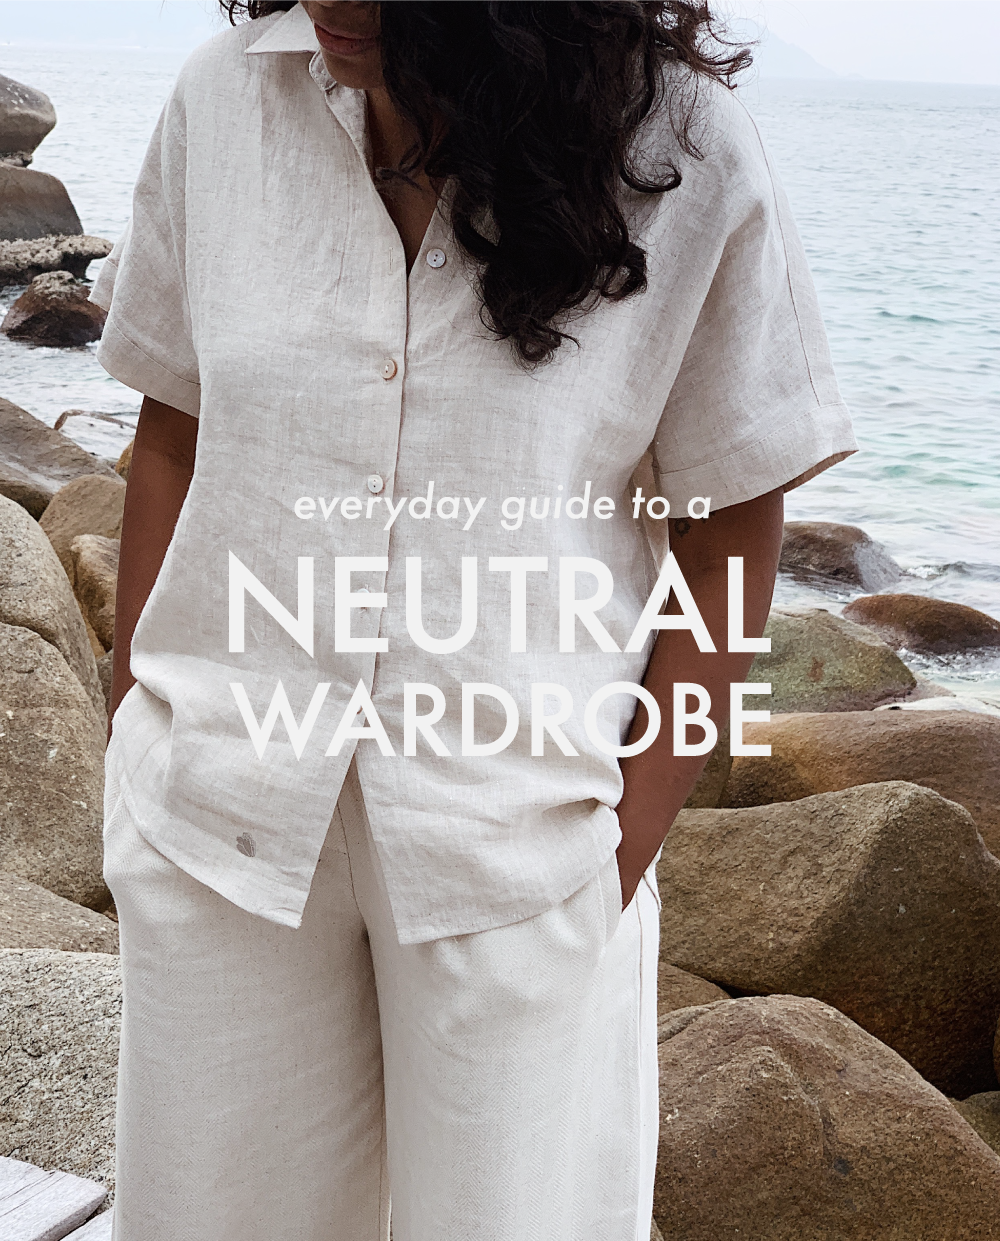 Everyday Guide: A Neutral Wardrobe